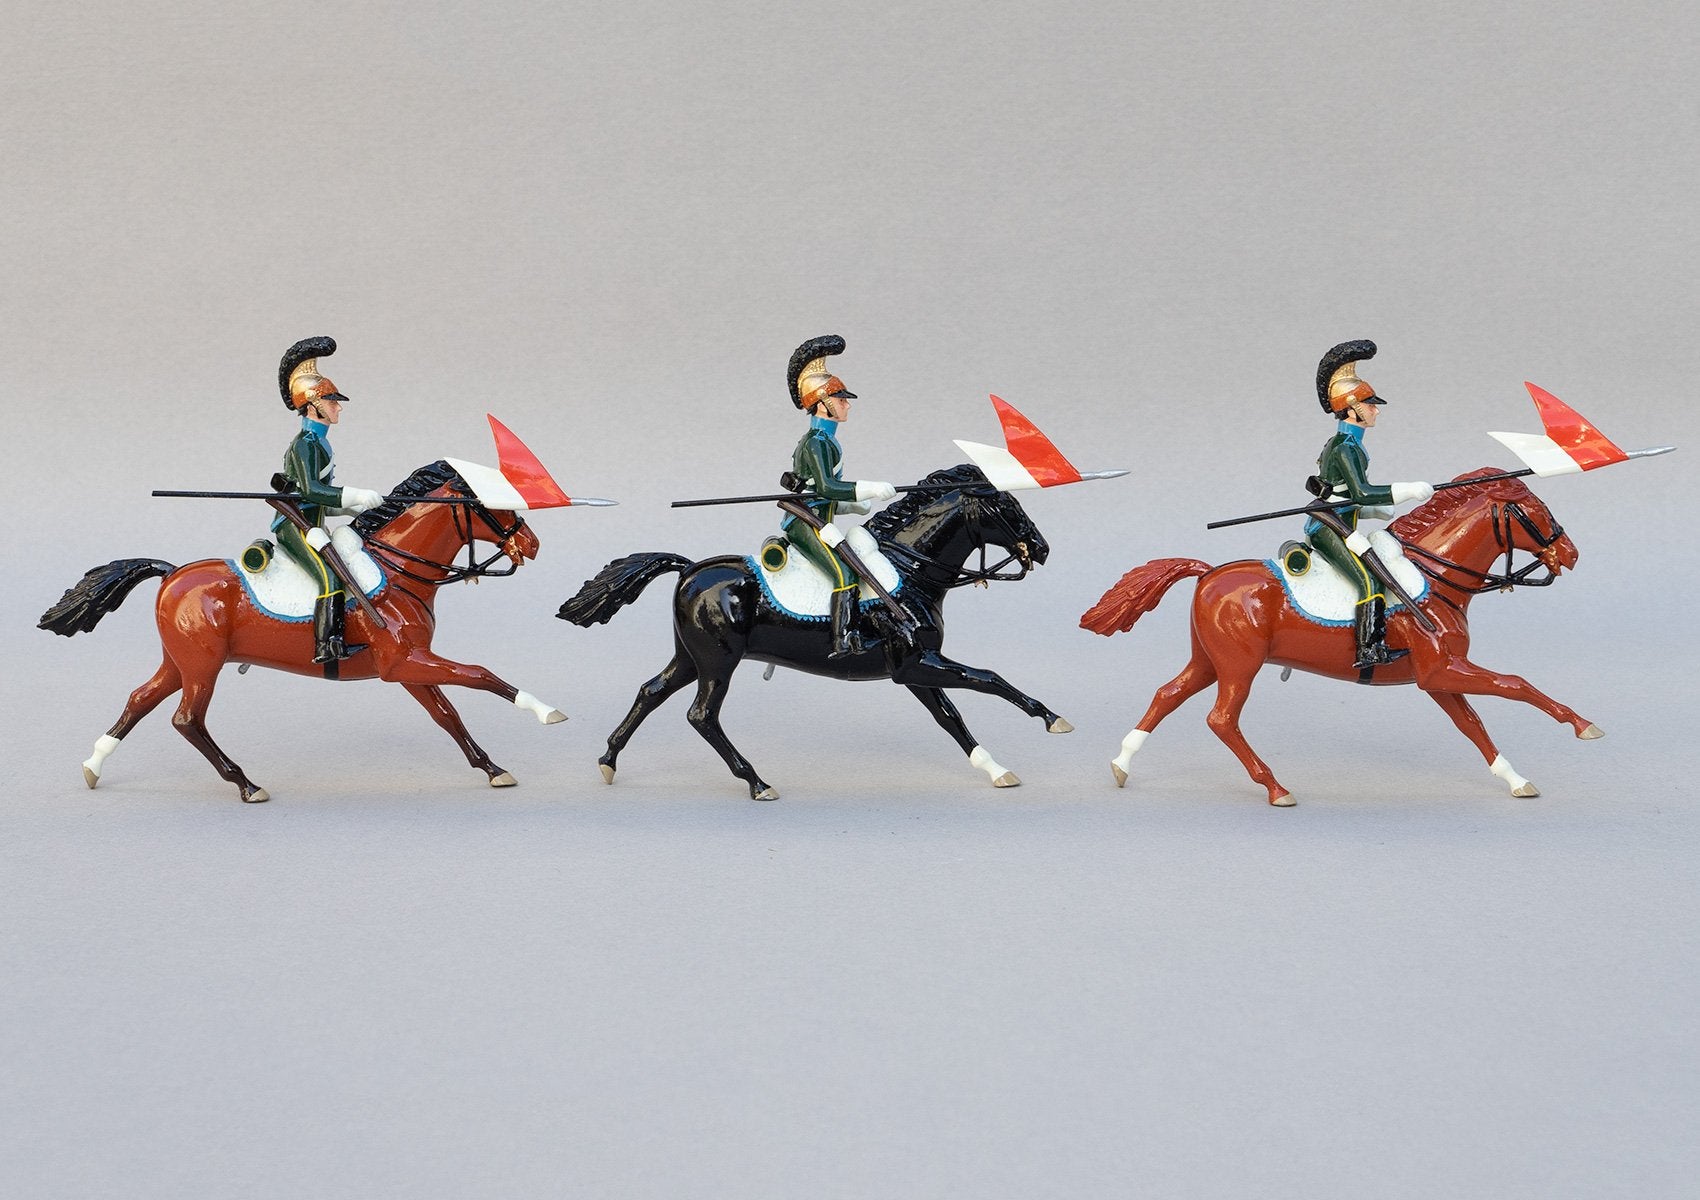 Set 133 5th Chevau-Legers Lancers | French Cavalry | Napoleonic Wars | At Quatre Bras the Lancers were came close to capturing the Duke of Wellington  Three mounted cavalrymen lances adorned with red and white pennants | Waterloo | © Imperial Productions | Sculpt by David Cowe